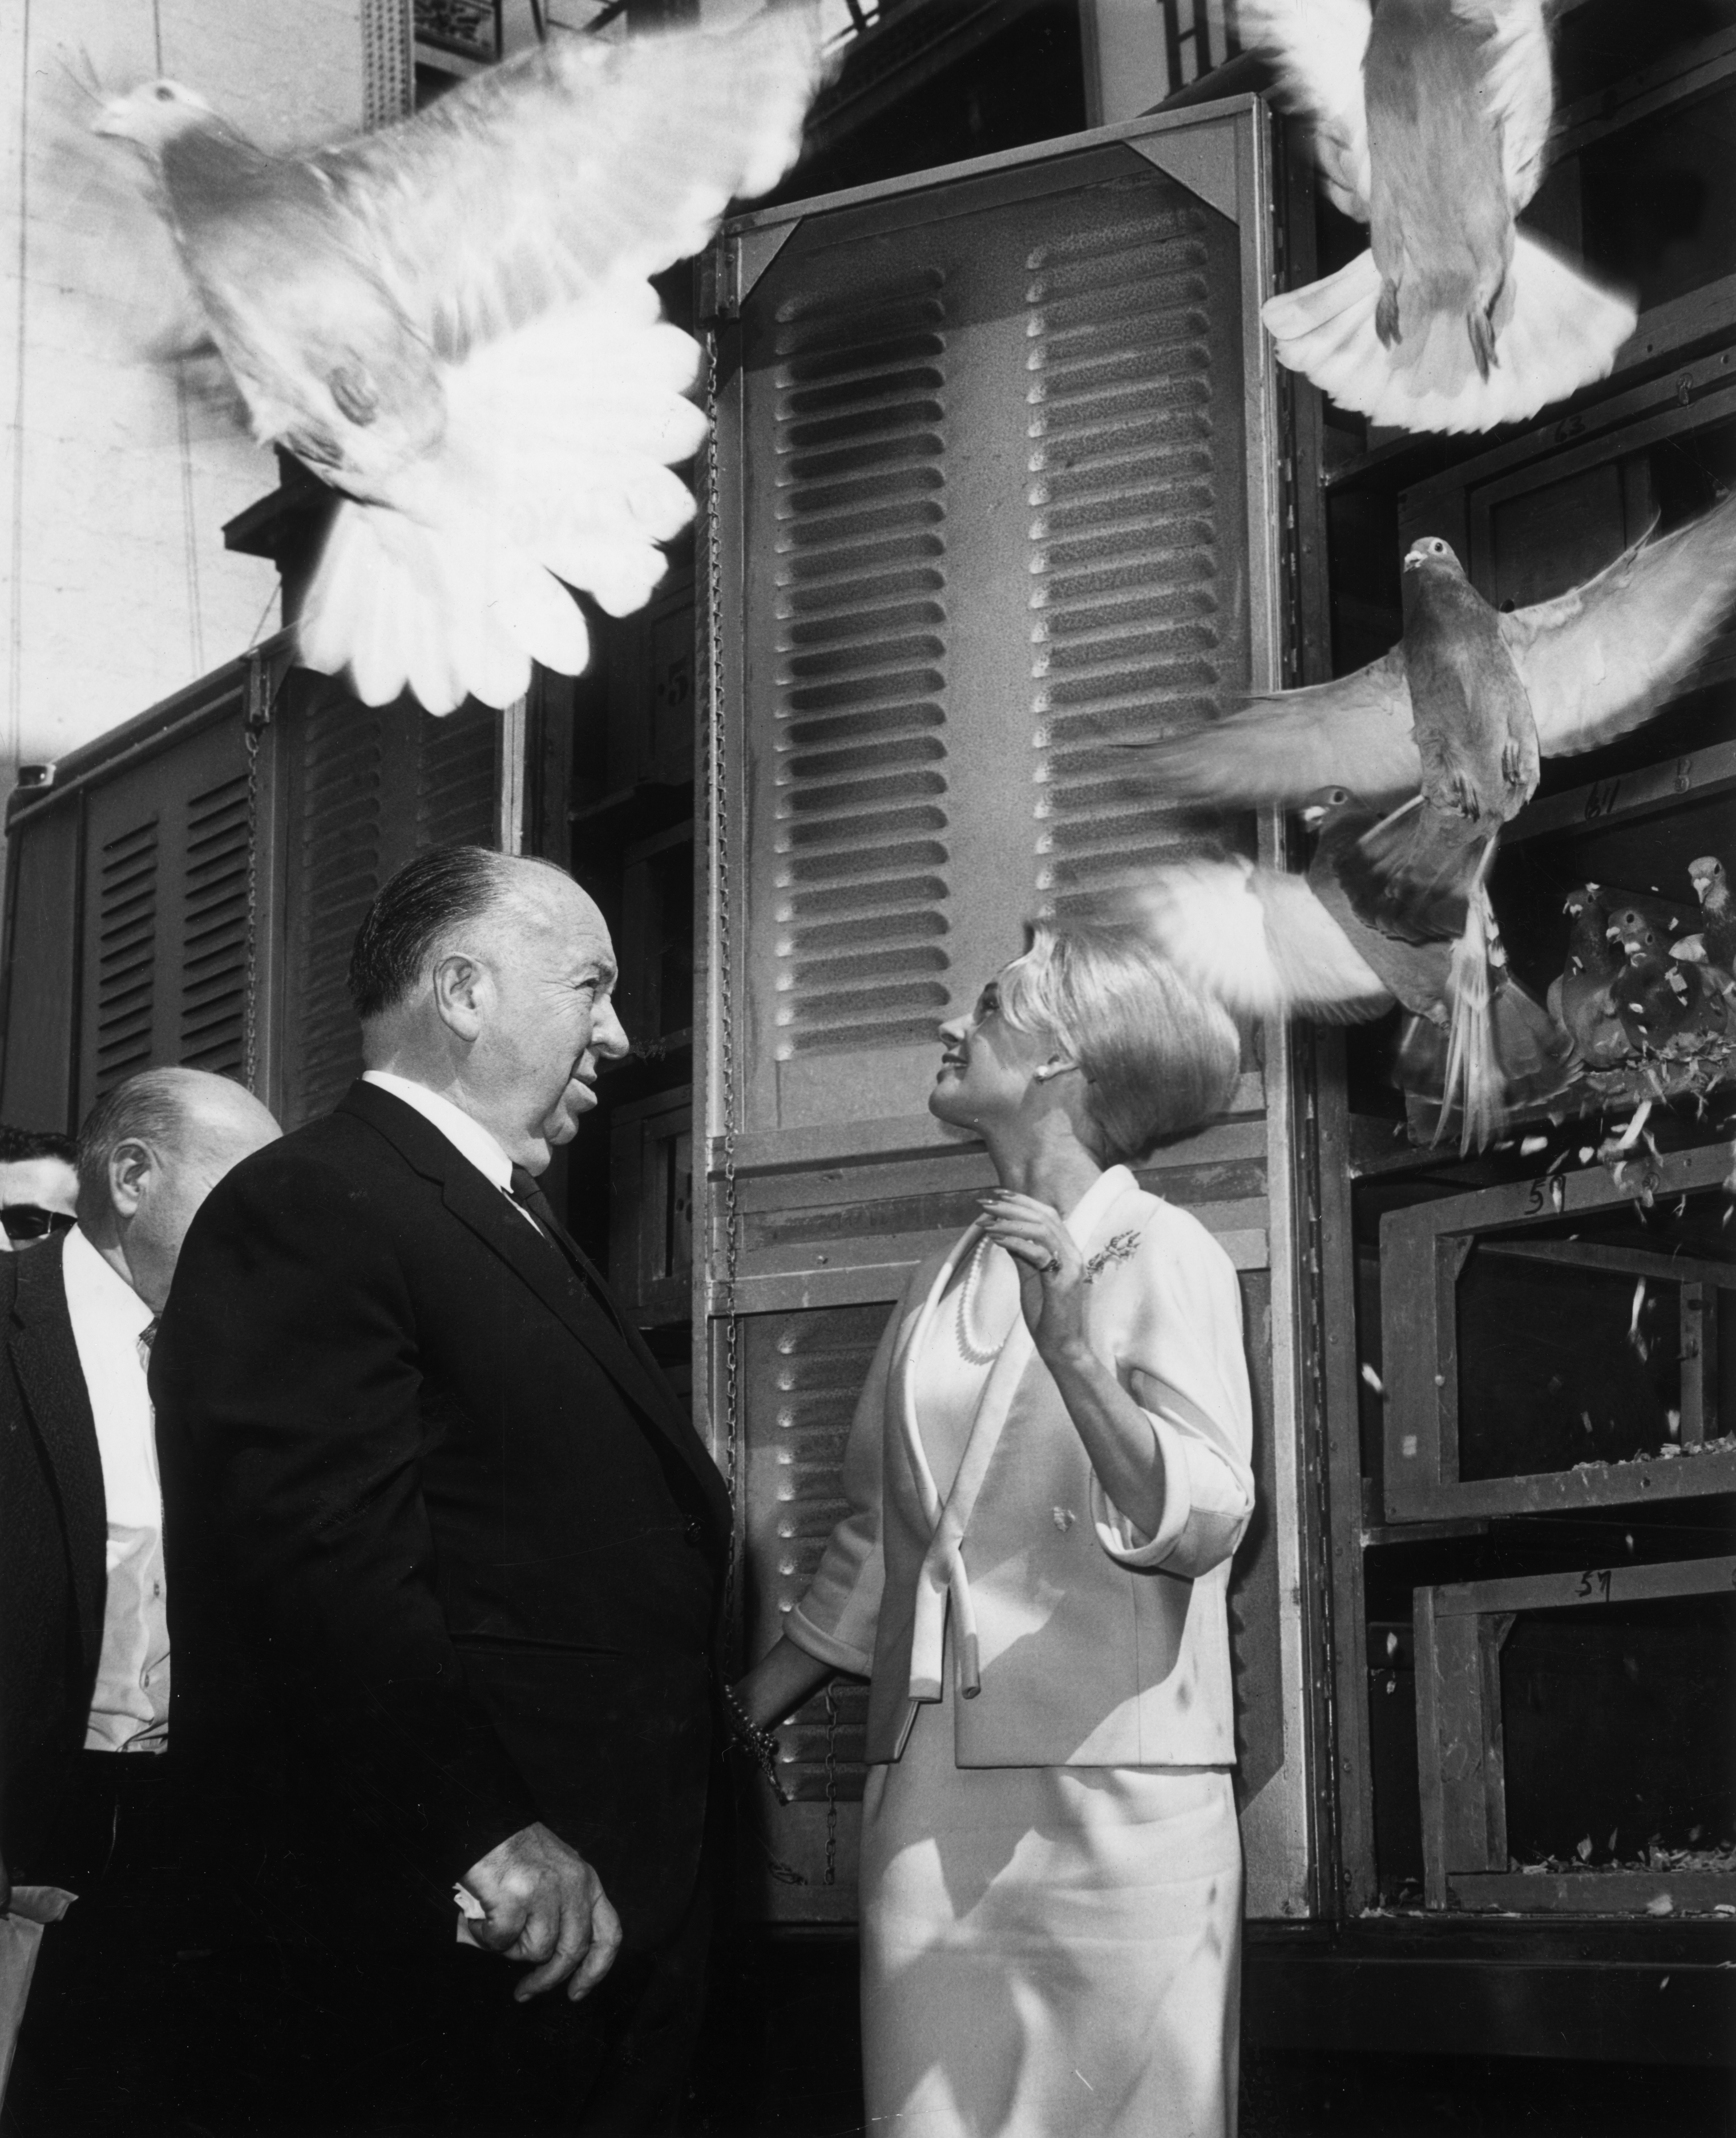 Alfred Hitchcock and Tippi Hedren release 1,000 pigeons to mark the opening of "The Birds" at the RKO Palace Theater in New York City in 1963. | Source: Getty Images